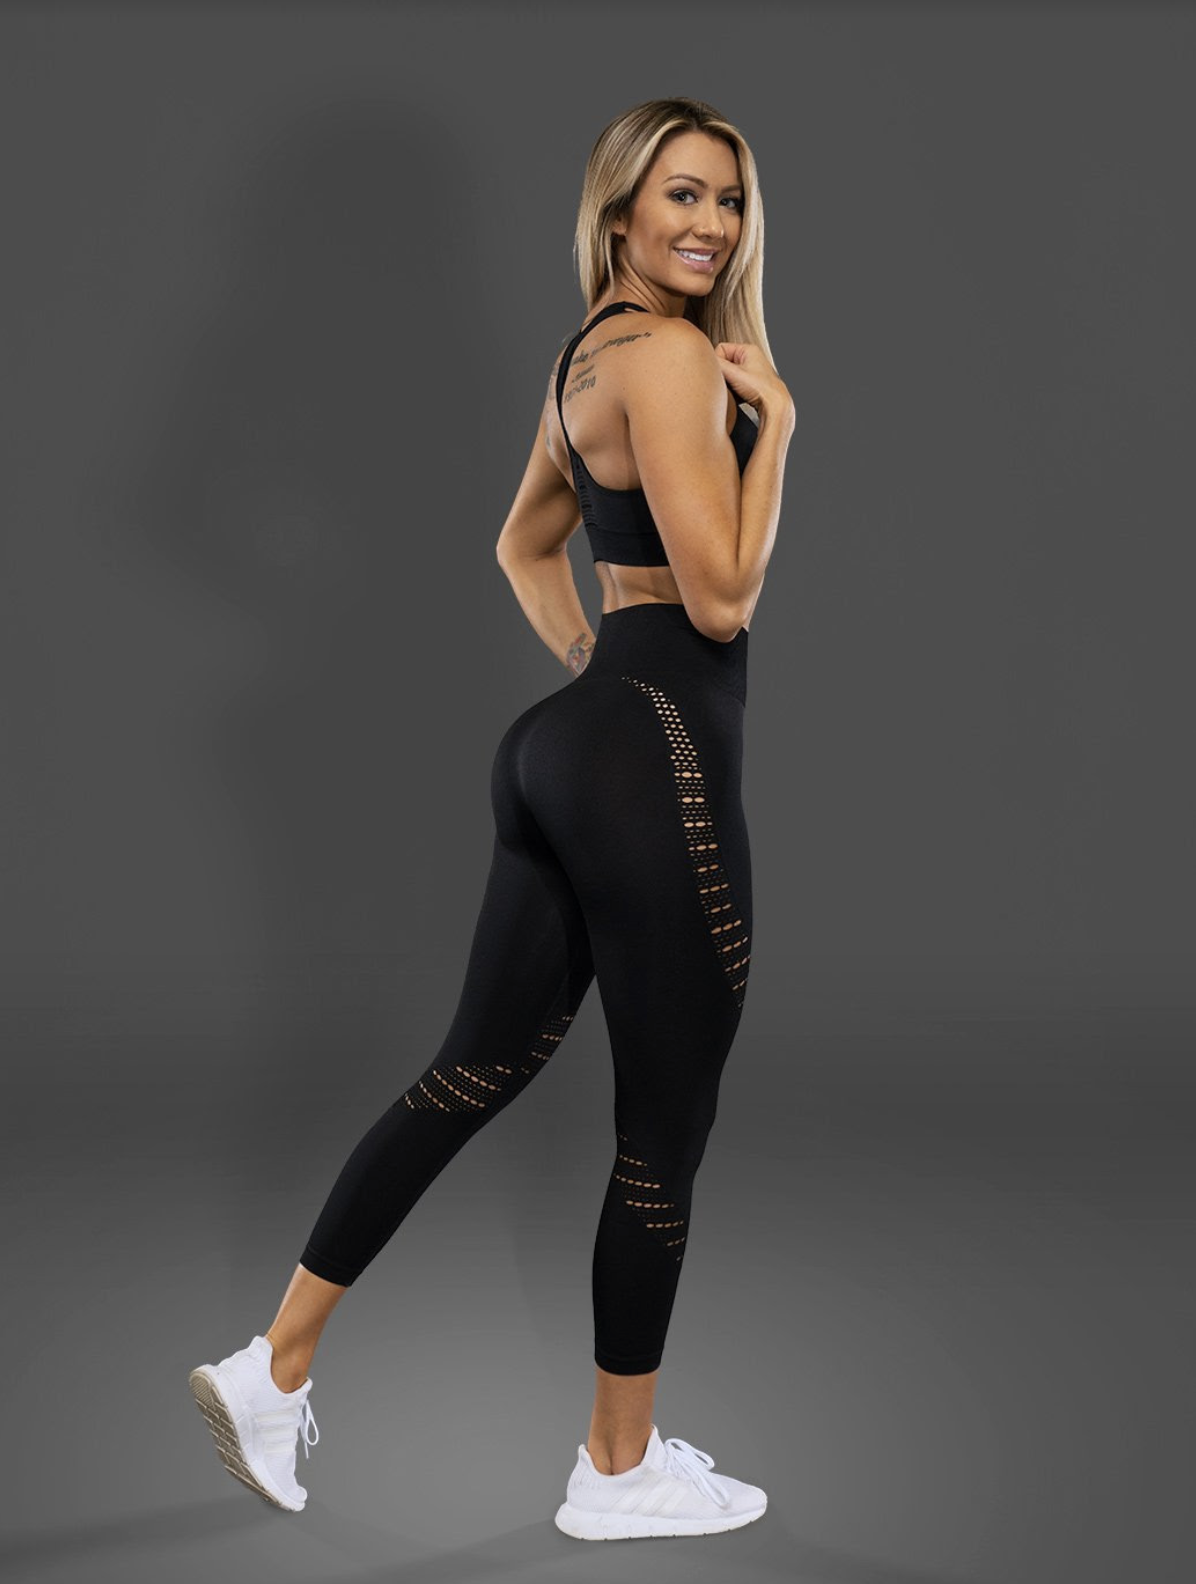 Strong, Confident and Sexy Workout Gear Made for BadAss Women